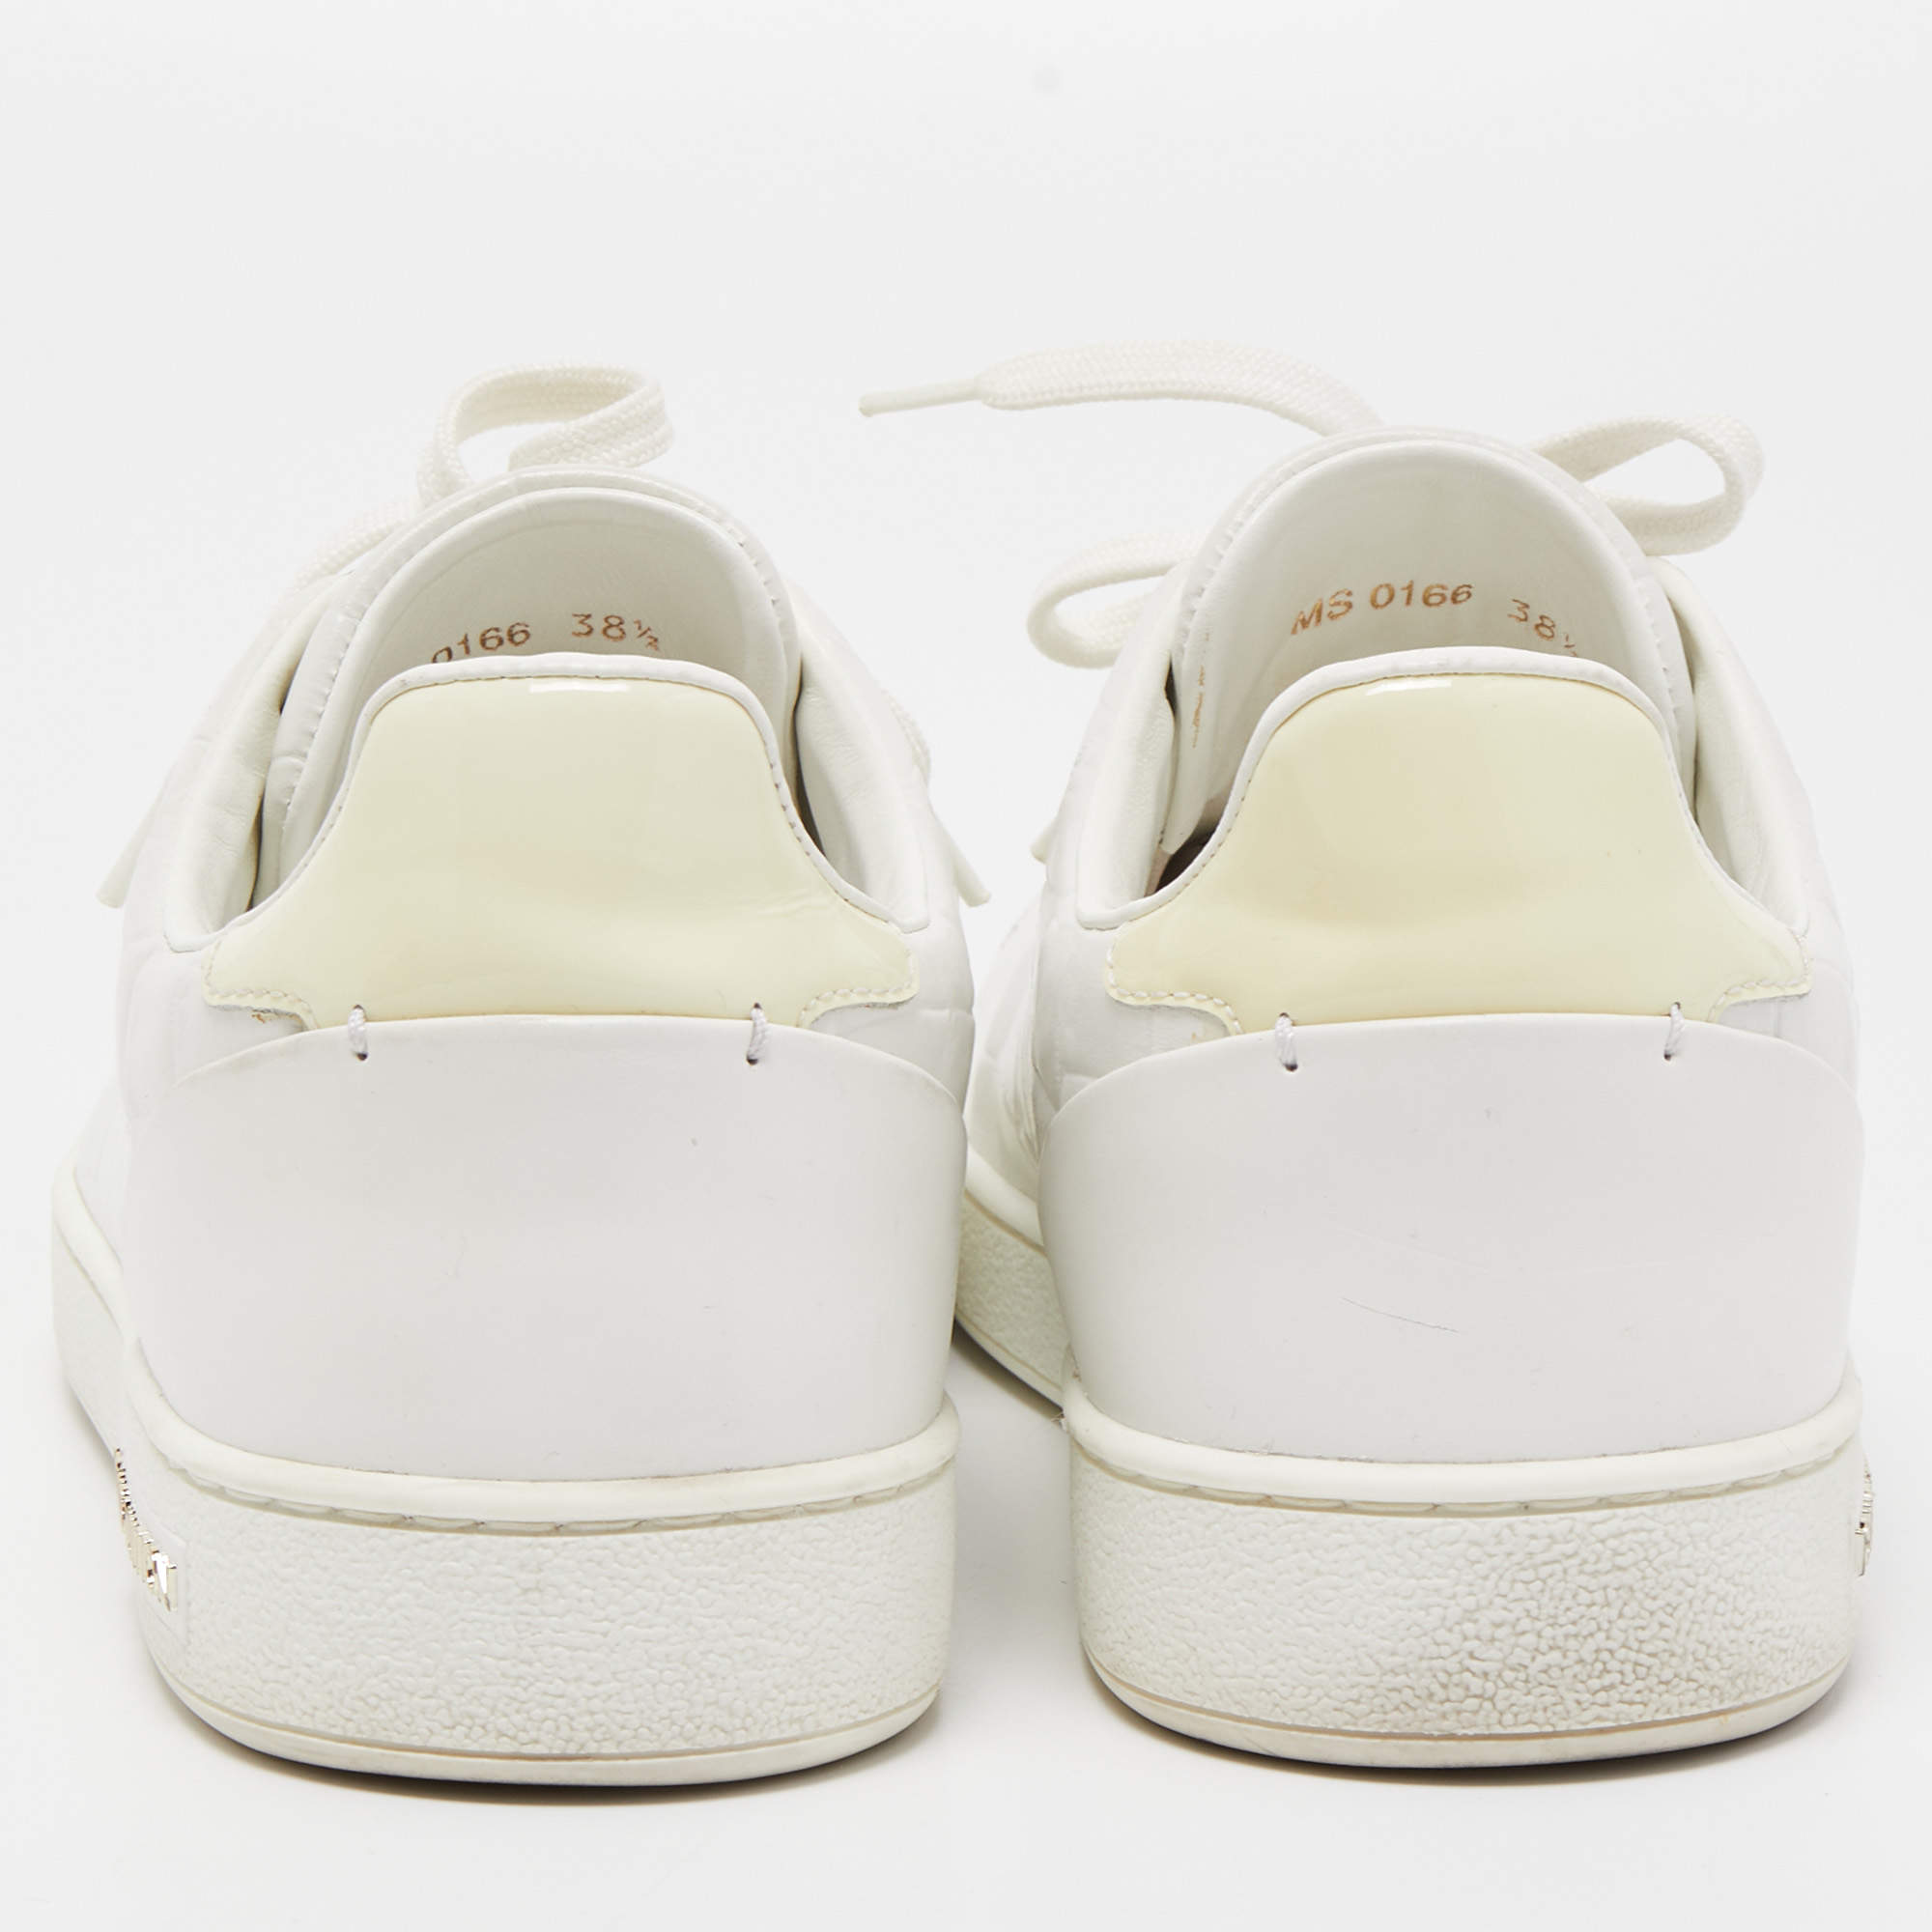 Louis Vuitton White Leather Frontrow Logo Embellished Lace Up Sneakers Size 40  Louis Vuitton